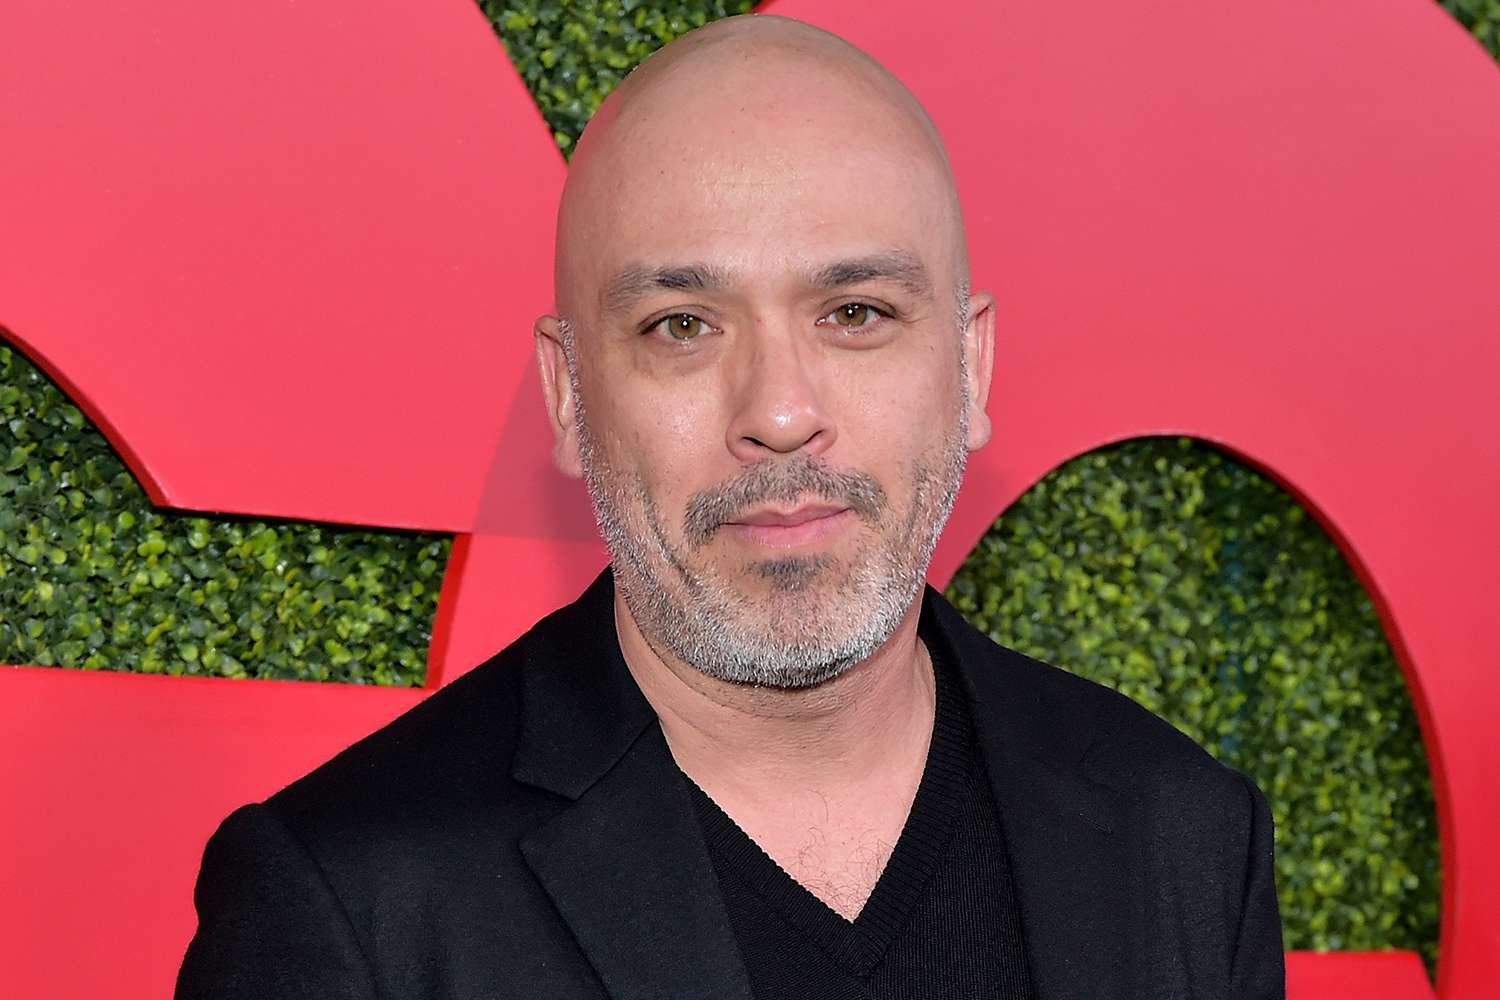 Is Jo Koy Bald Hair Linked To Cancer Or Alopecia Disease?